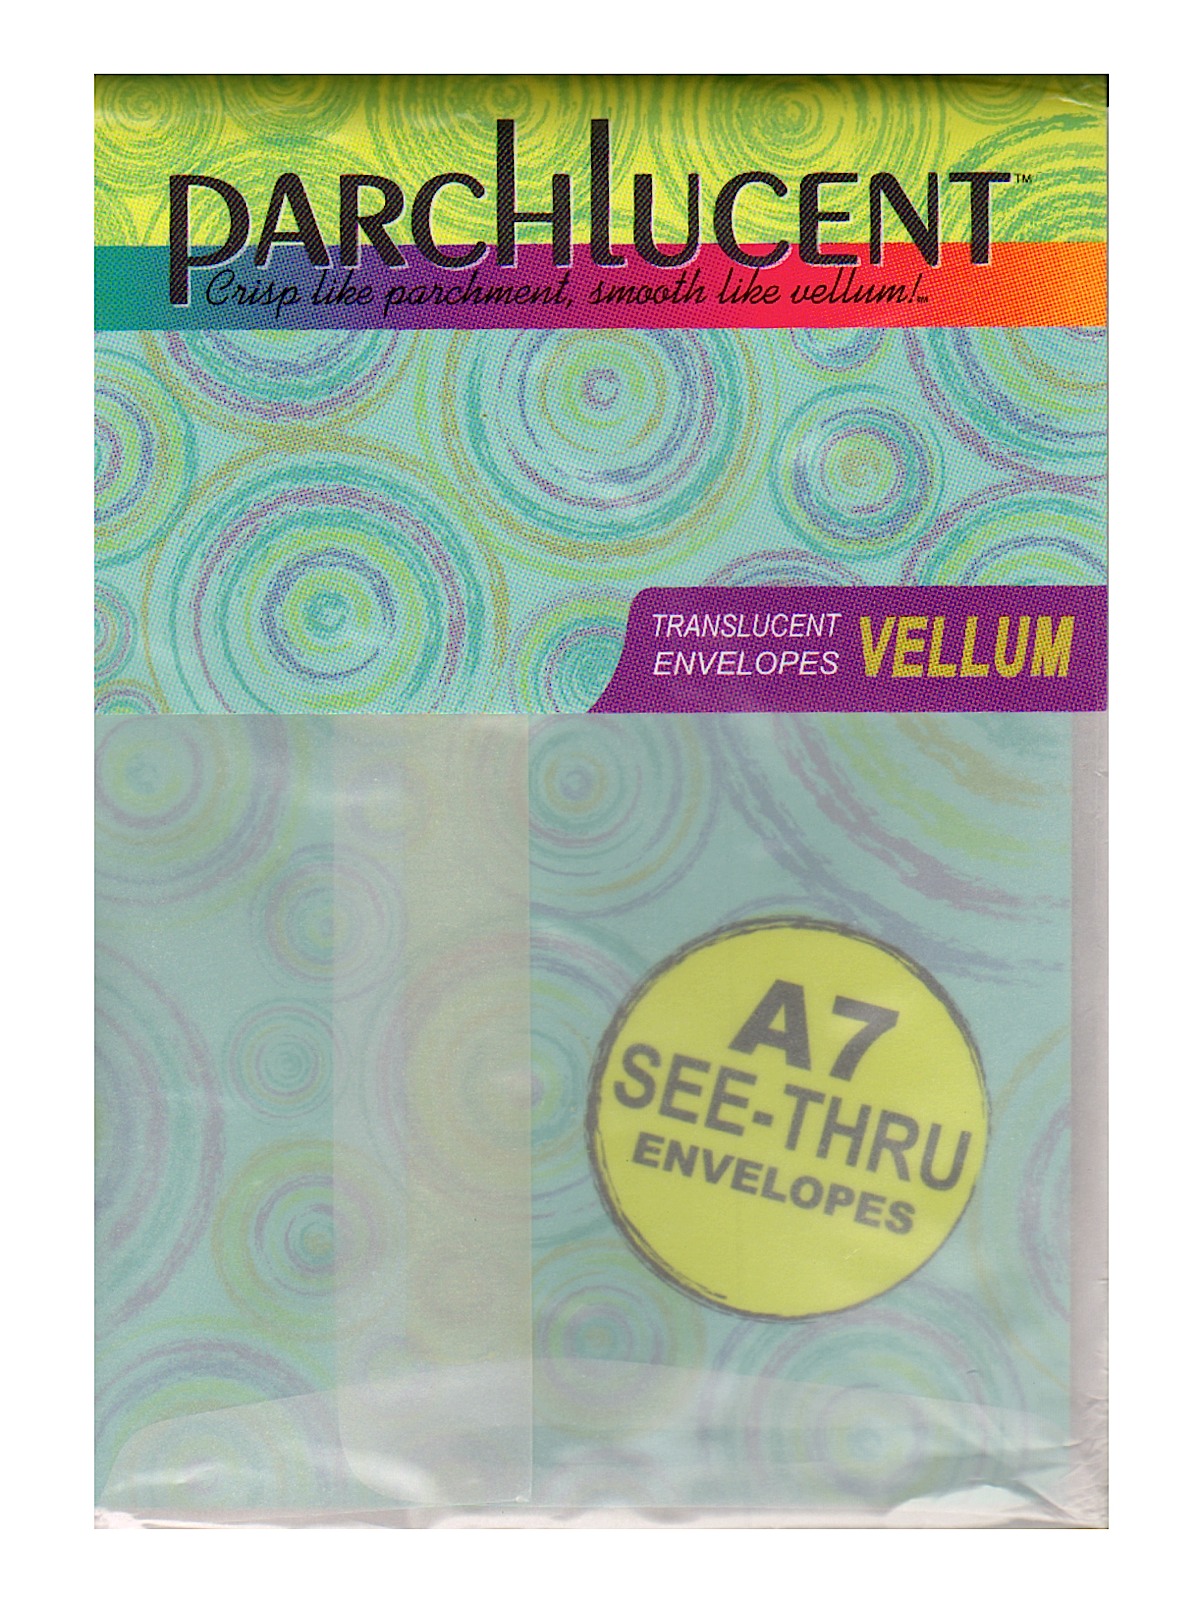 Parchlucent Envelopes 30 Lb. A7 5 1 4 In. X 7 1 4 In. Pack Of 25